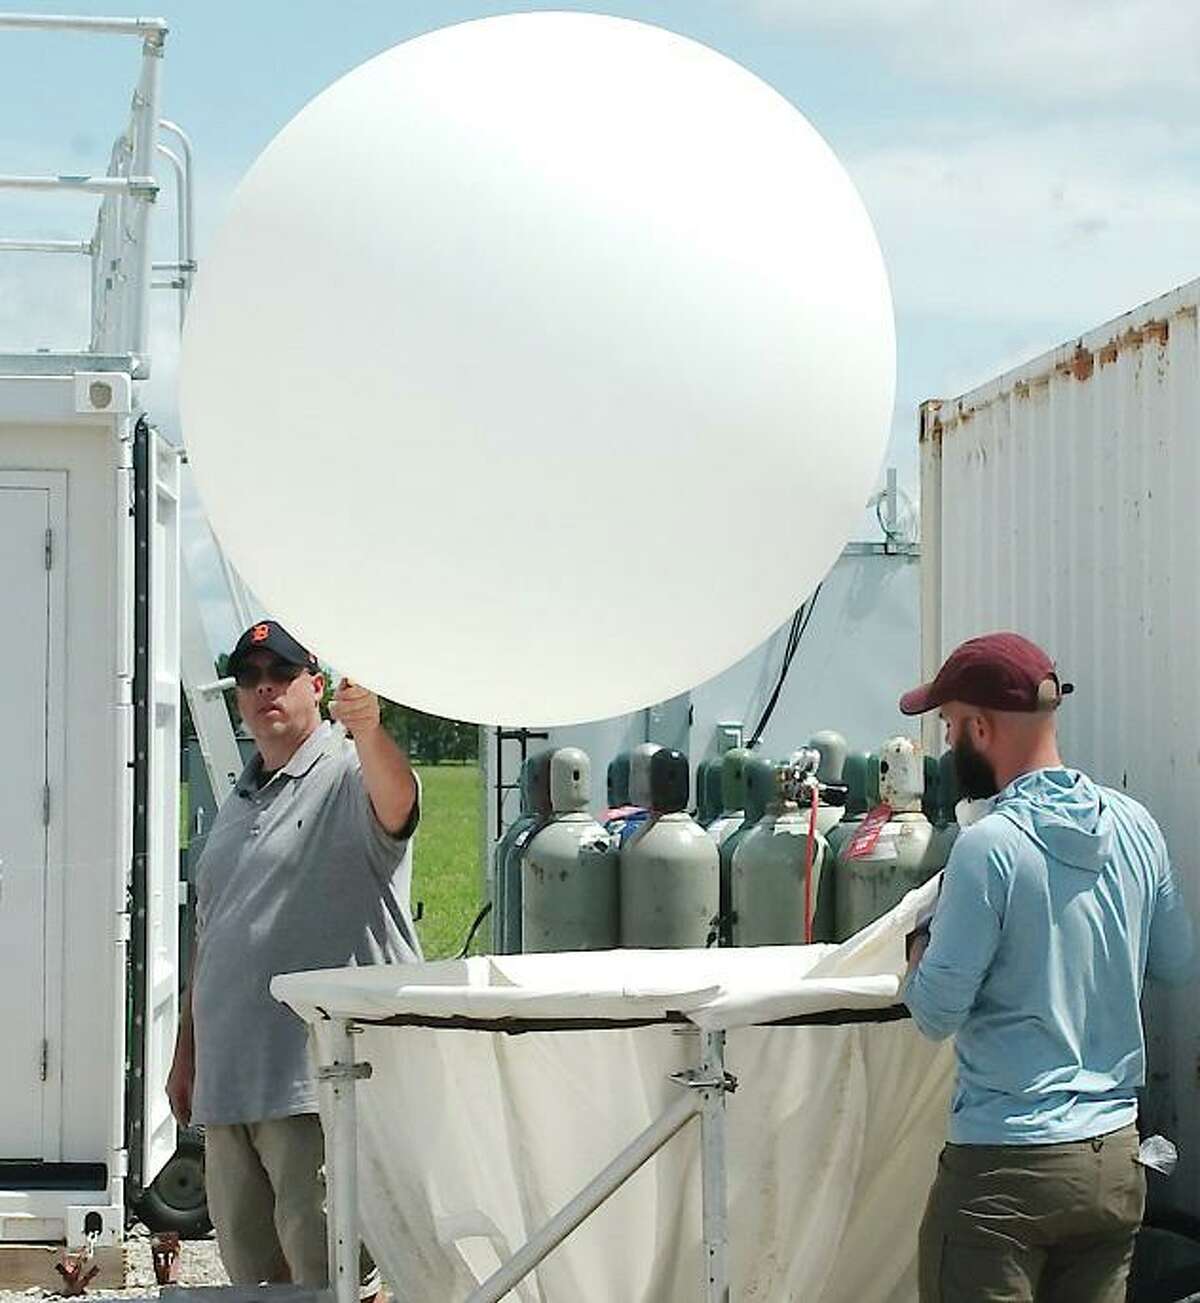 Atmospheric Radiation Measurement Mobile Facility technicians David Oaks and Mark Spychala inflate a weather balloon with helium that will be used to gather atmospheric data at the Department of Energy’s ARM facility at La Porte Municipal Airport.